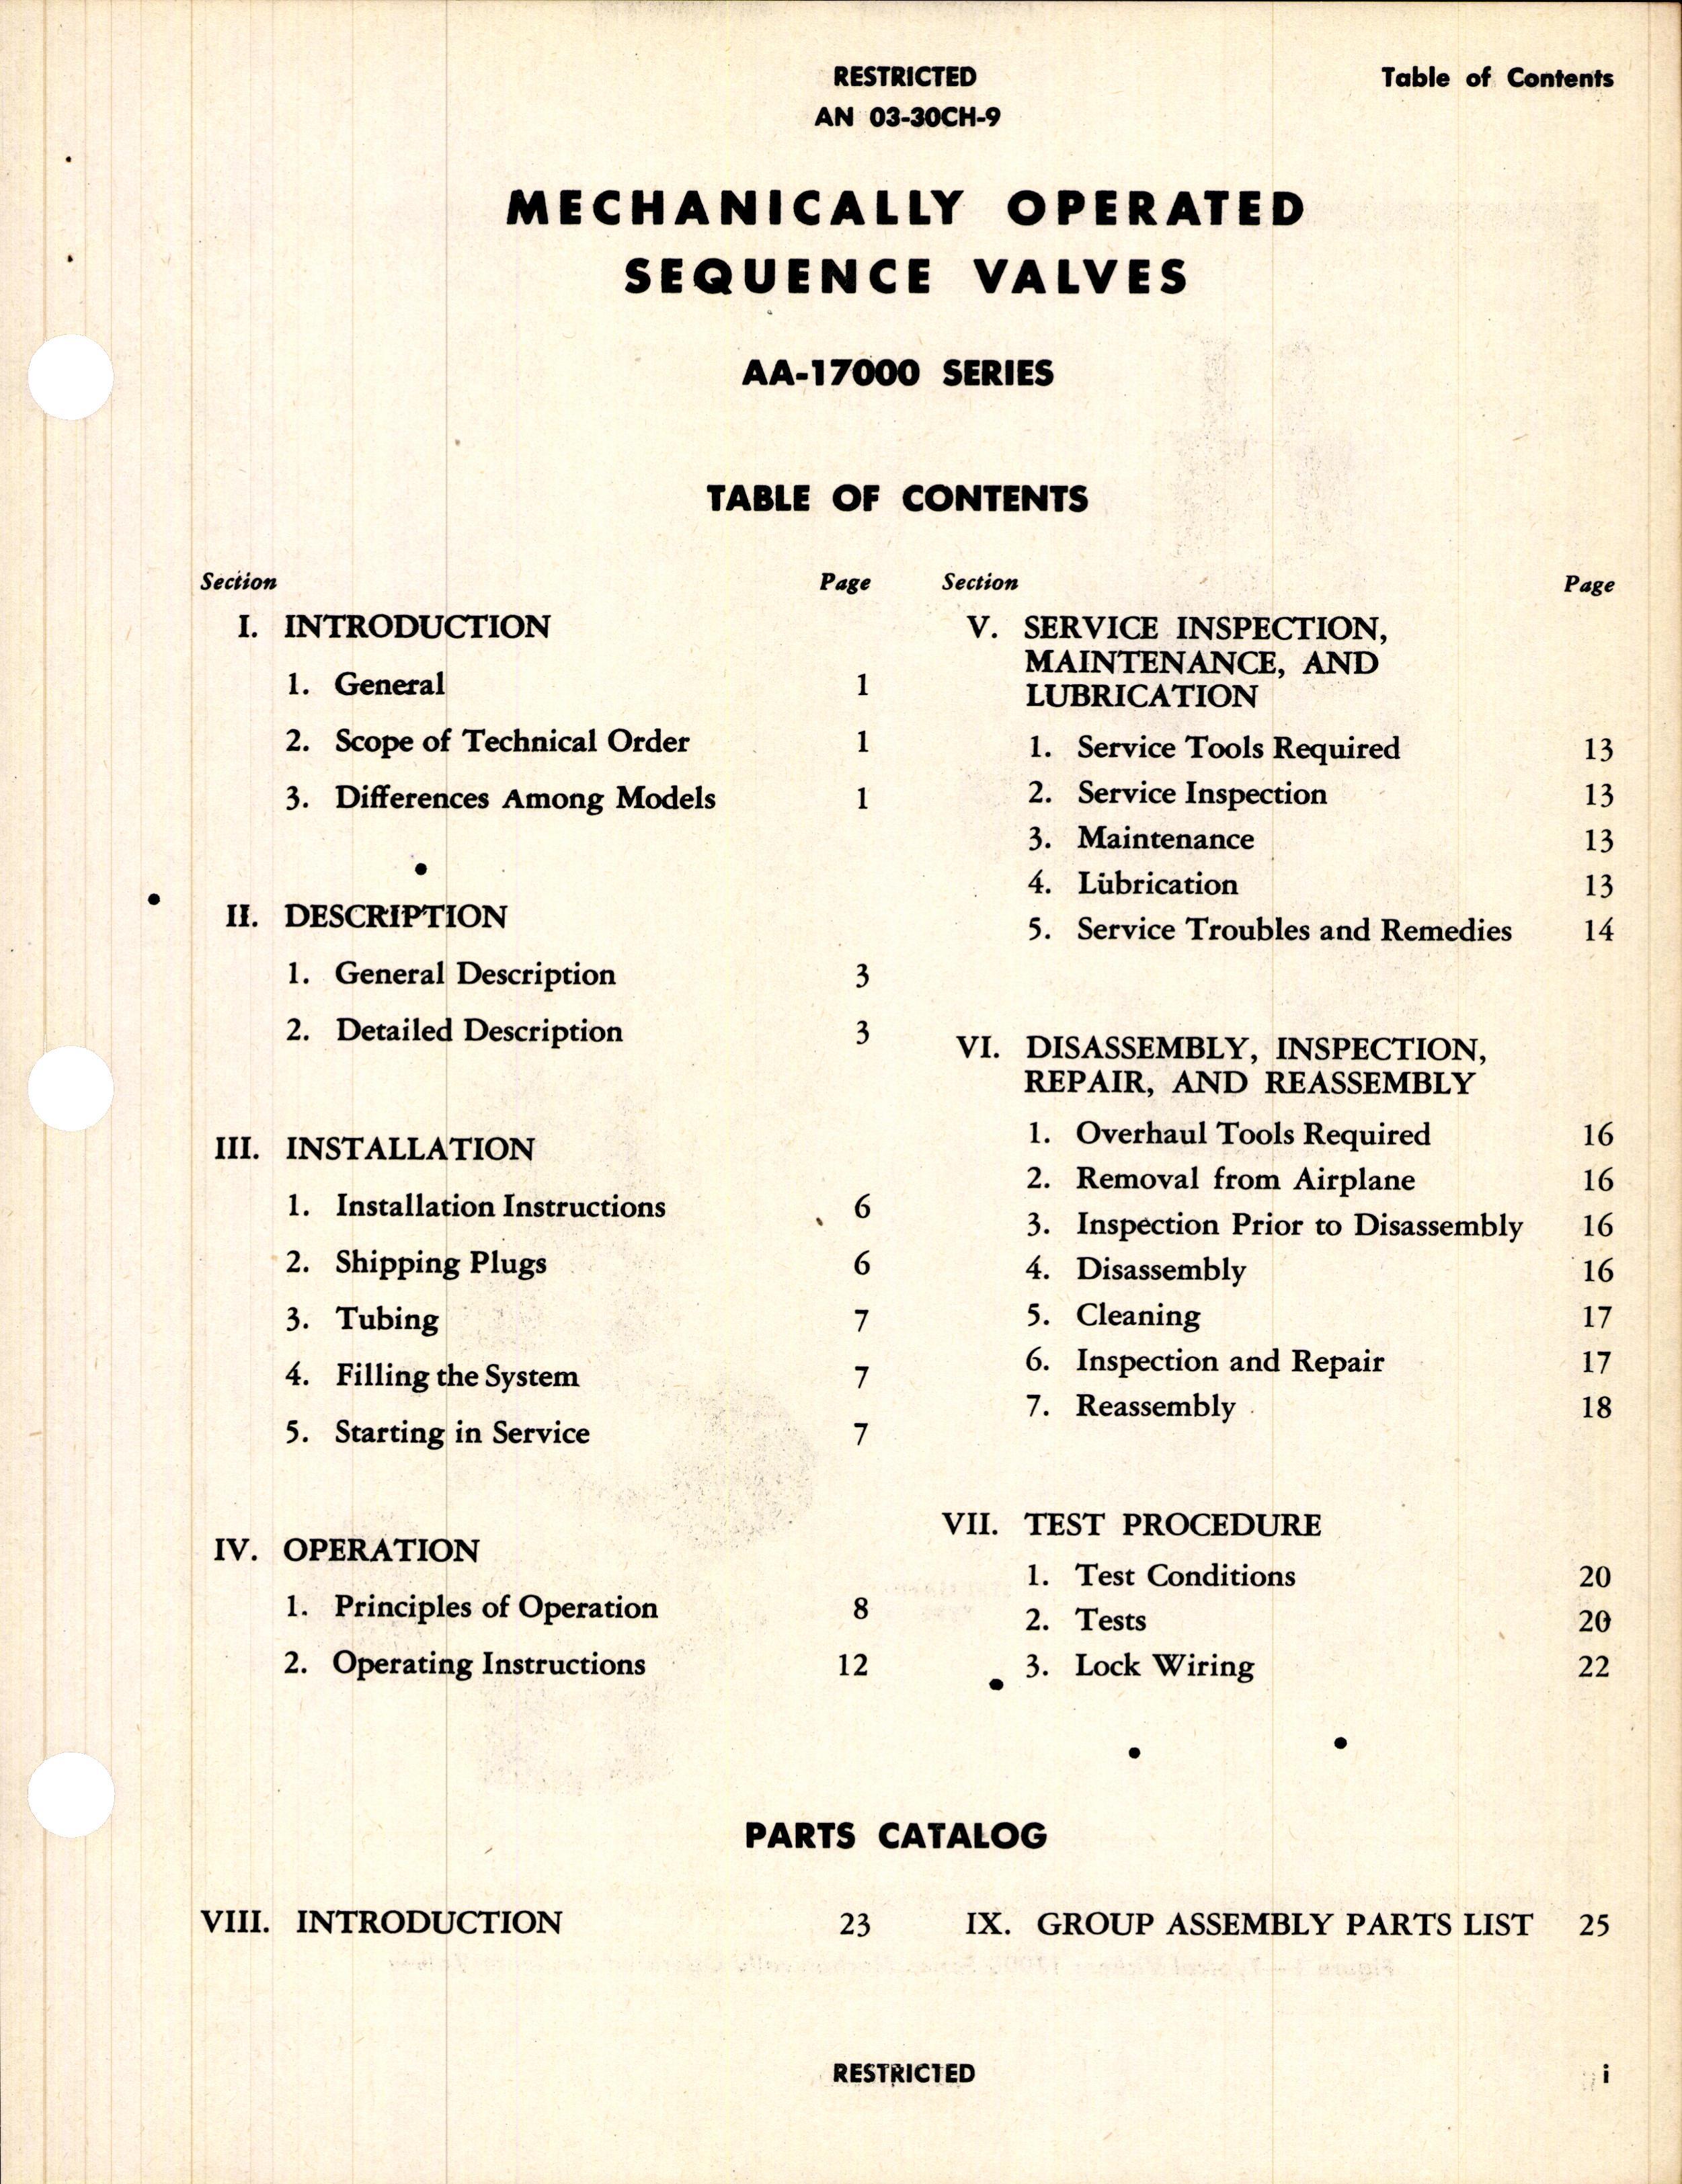 Sample page 3 from AirCorps Library document: Handbook of Instructions with Parts Catalog for Mechanically Operated Sequence Valves